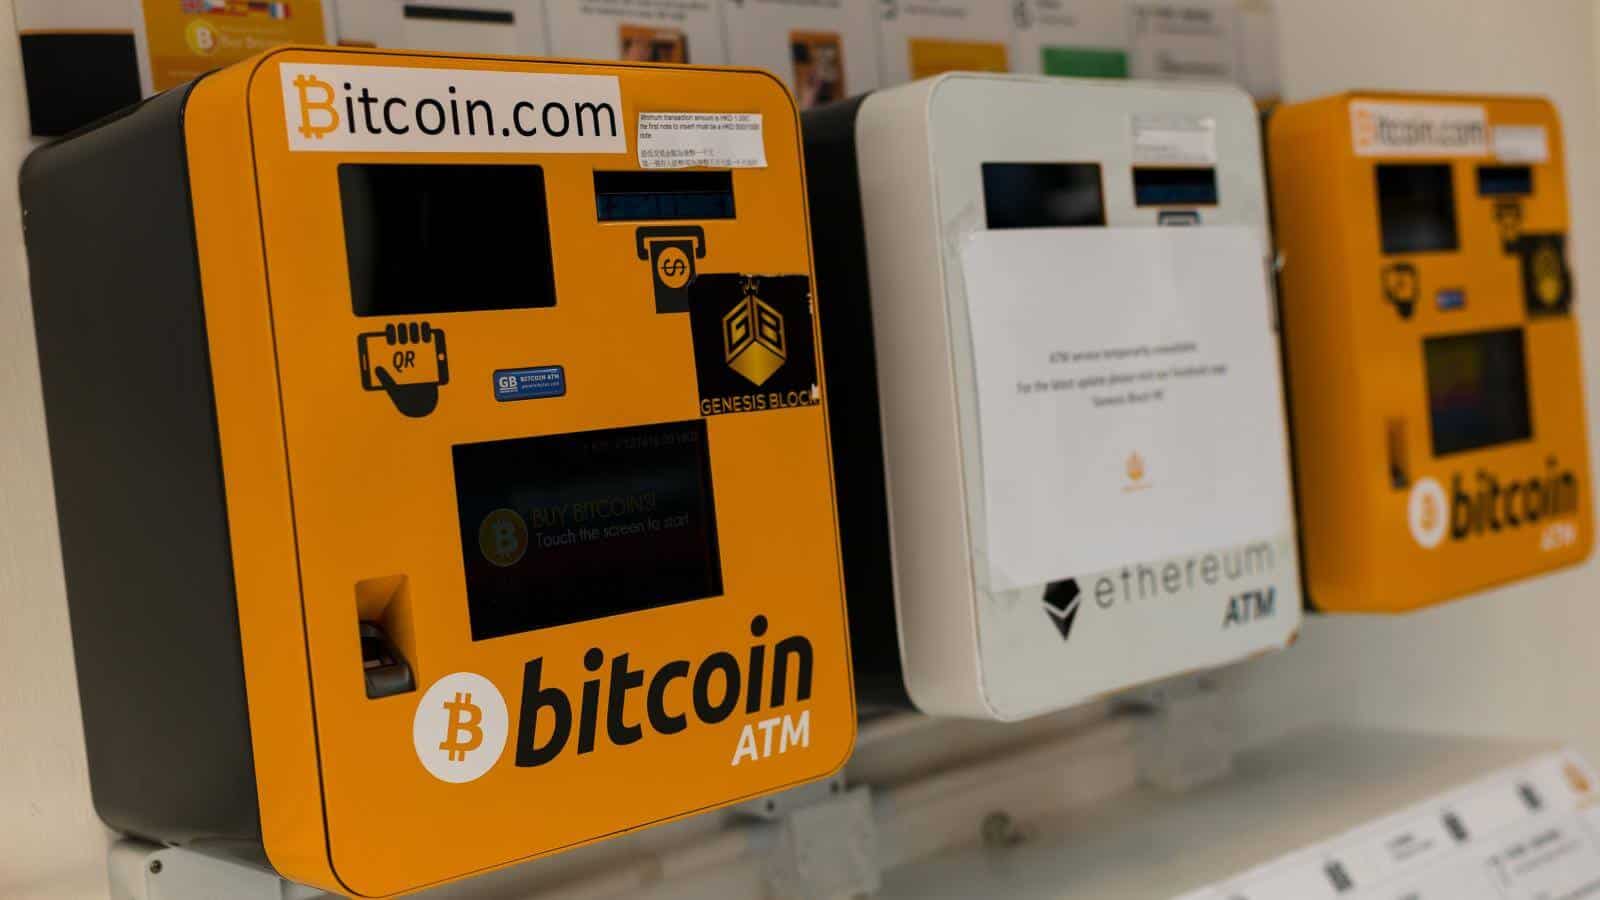 5 Top US Malls Now Have Bitcoin ATMs